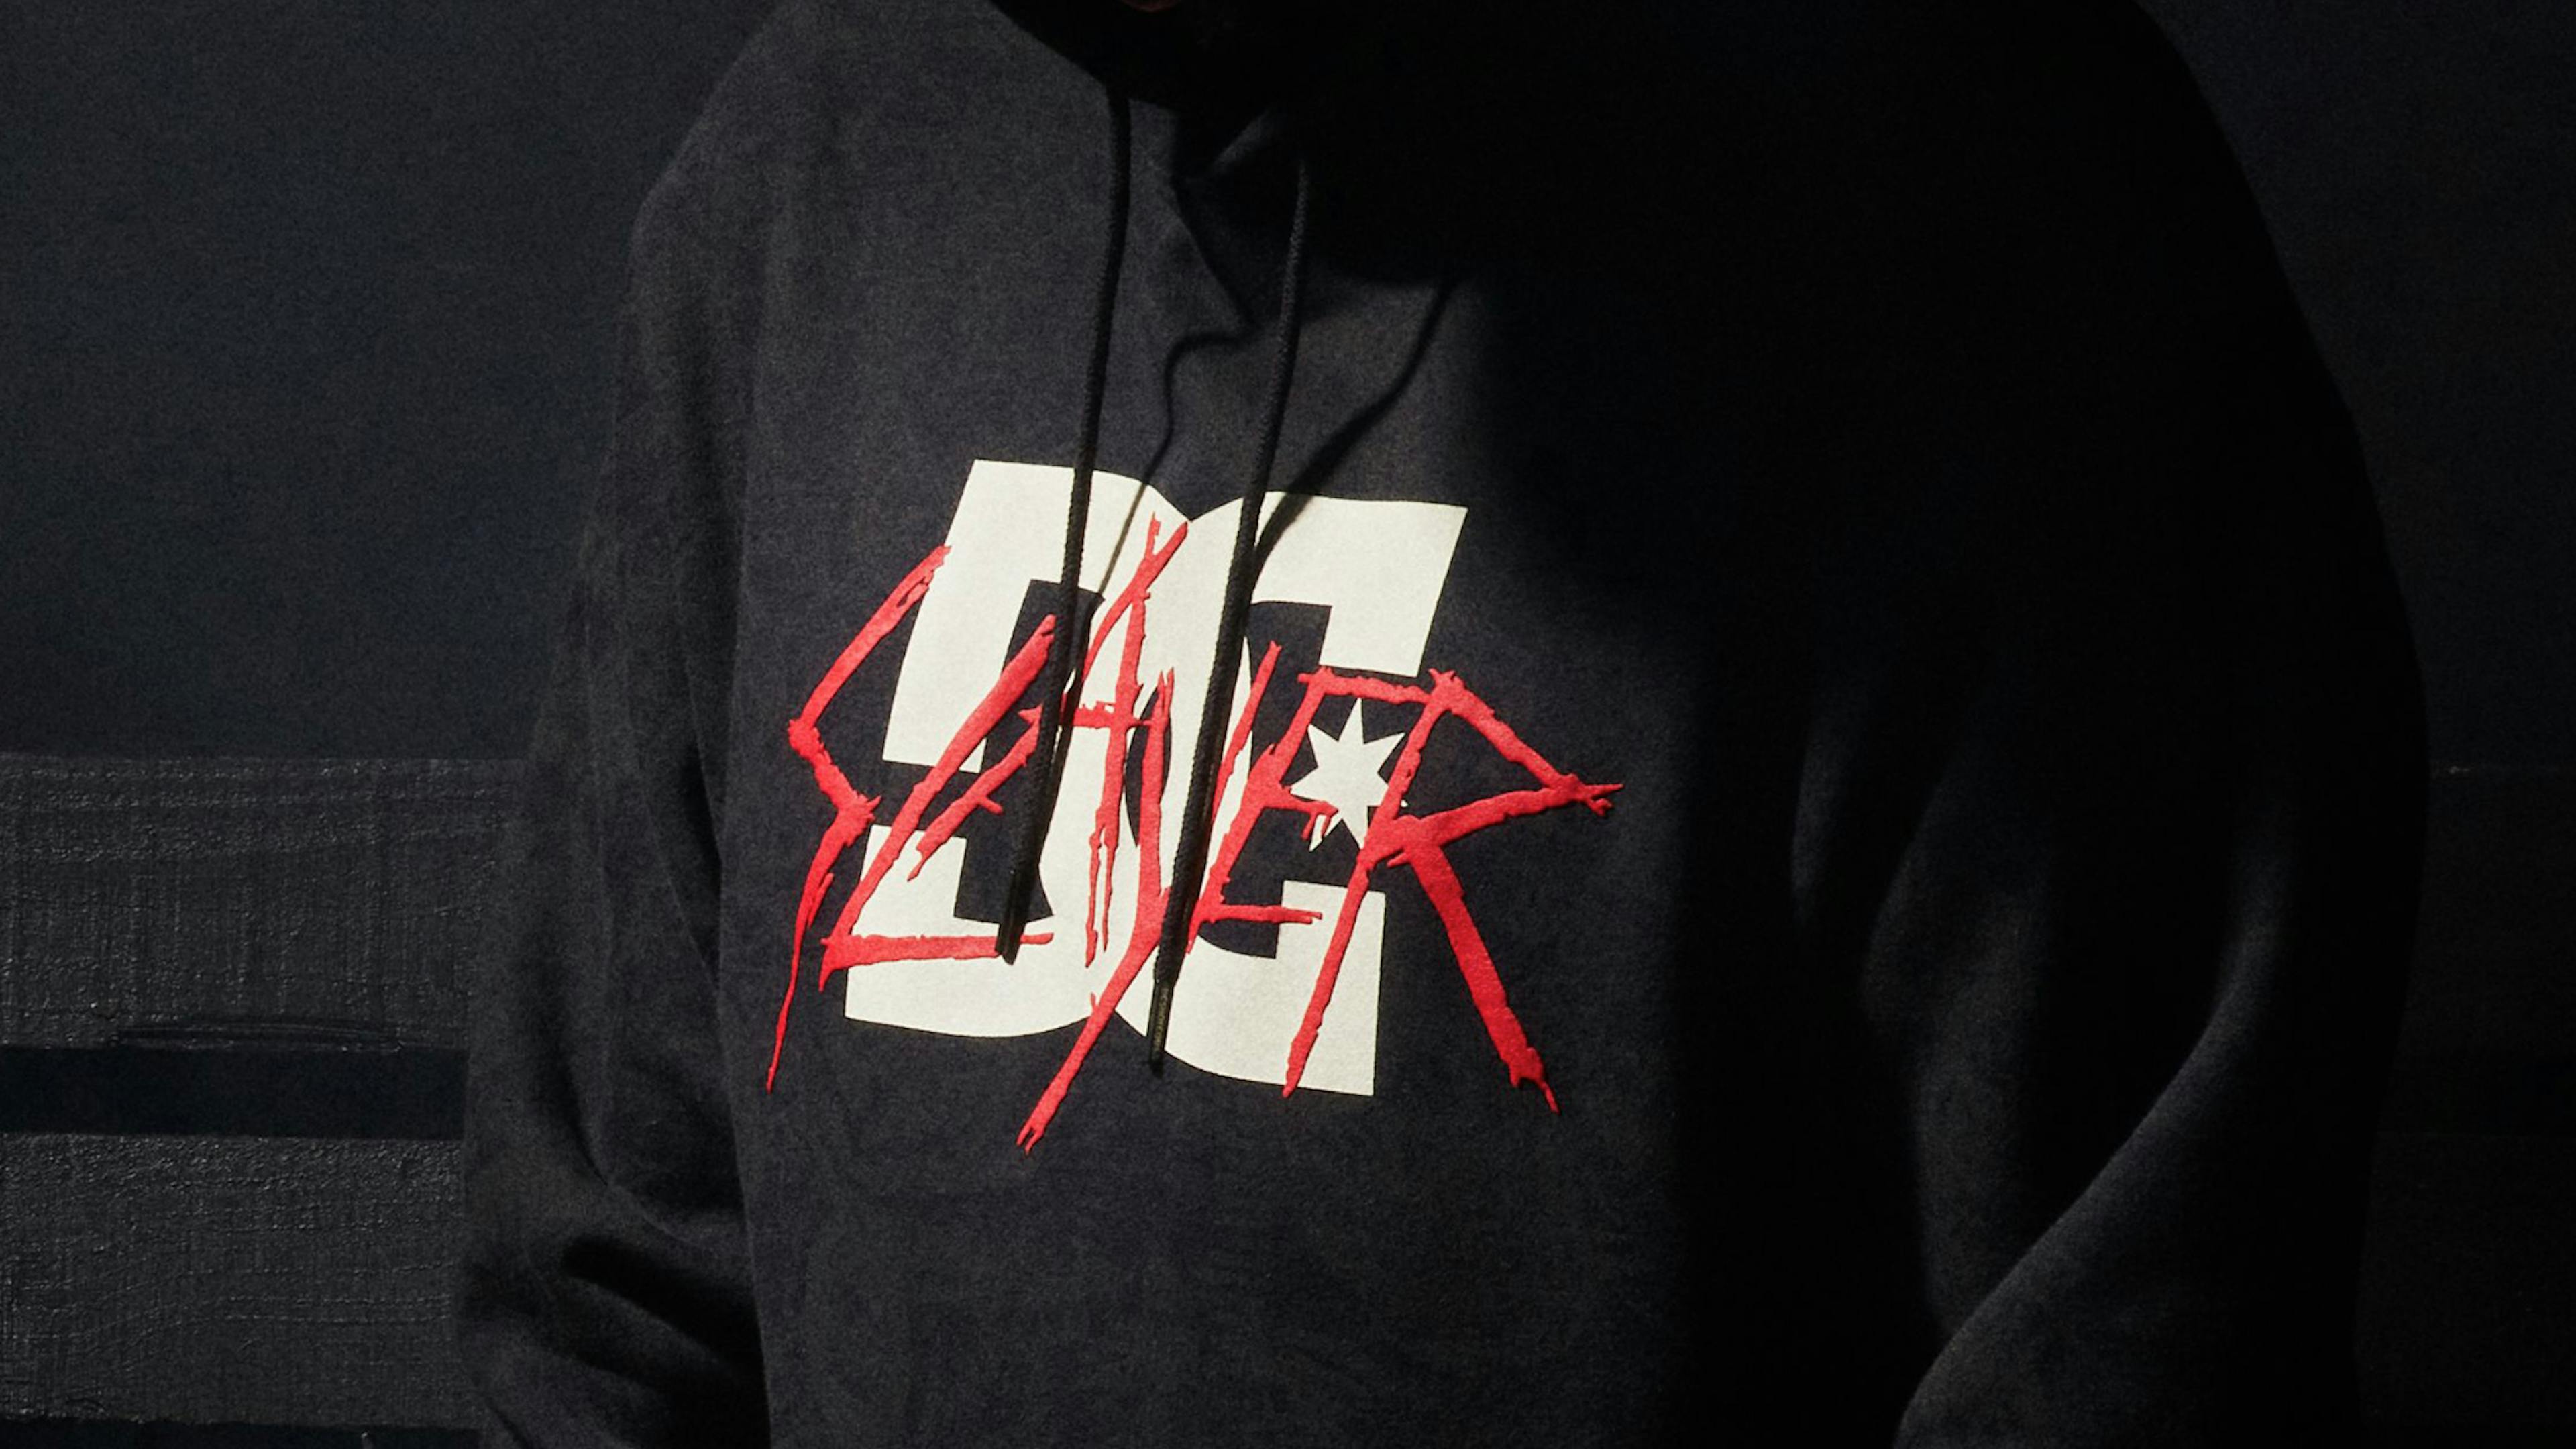 Check out the new DC x Slayer capsule collection